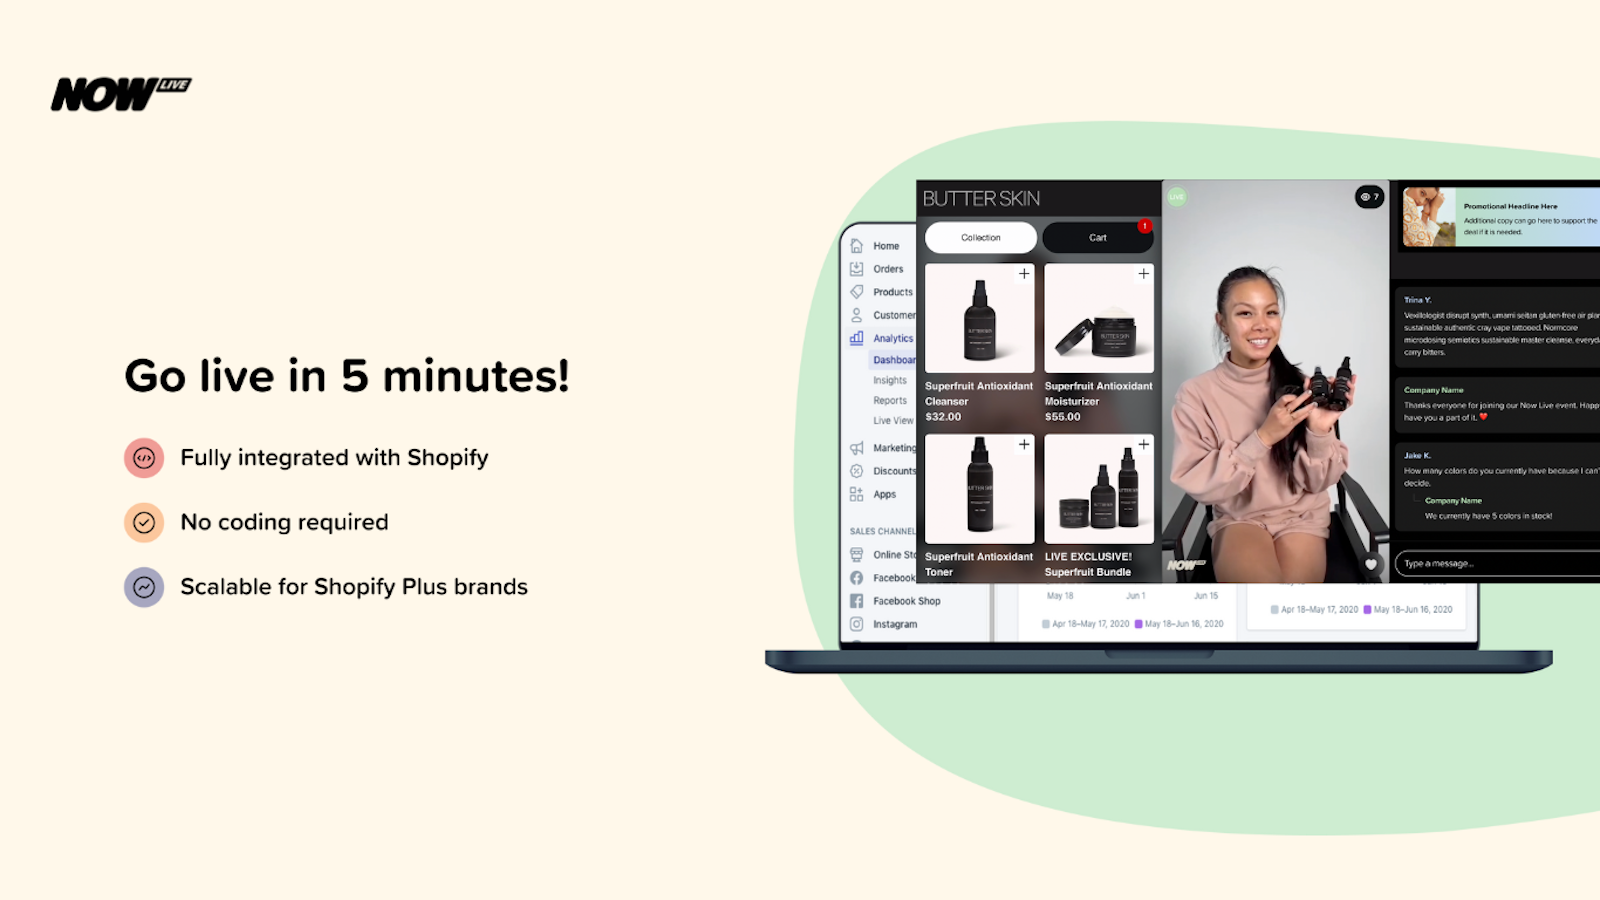 Easy to use live shopping platform for Shopify